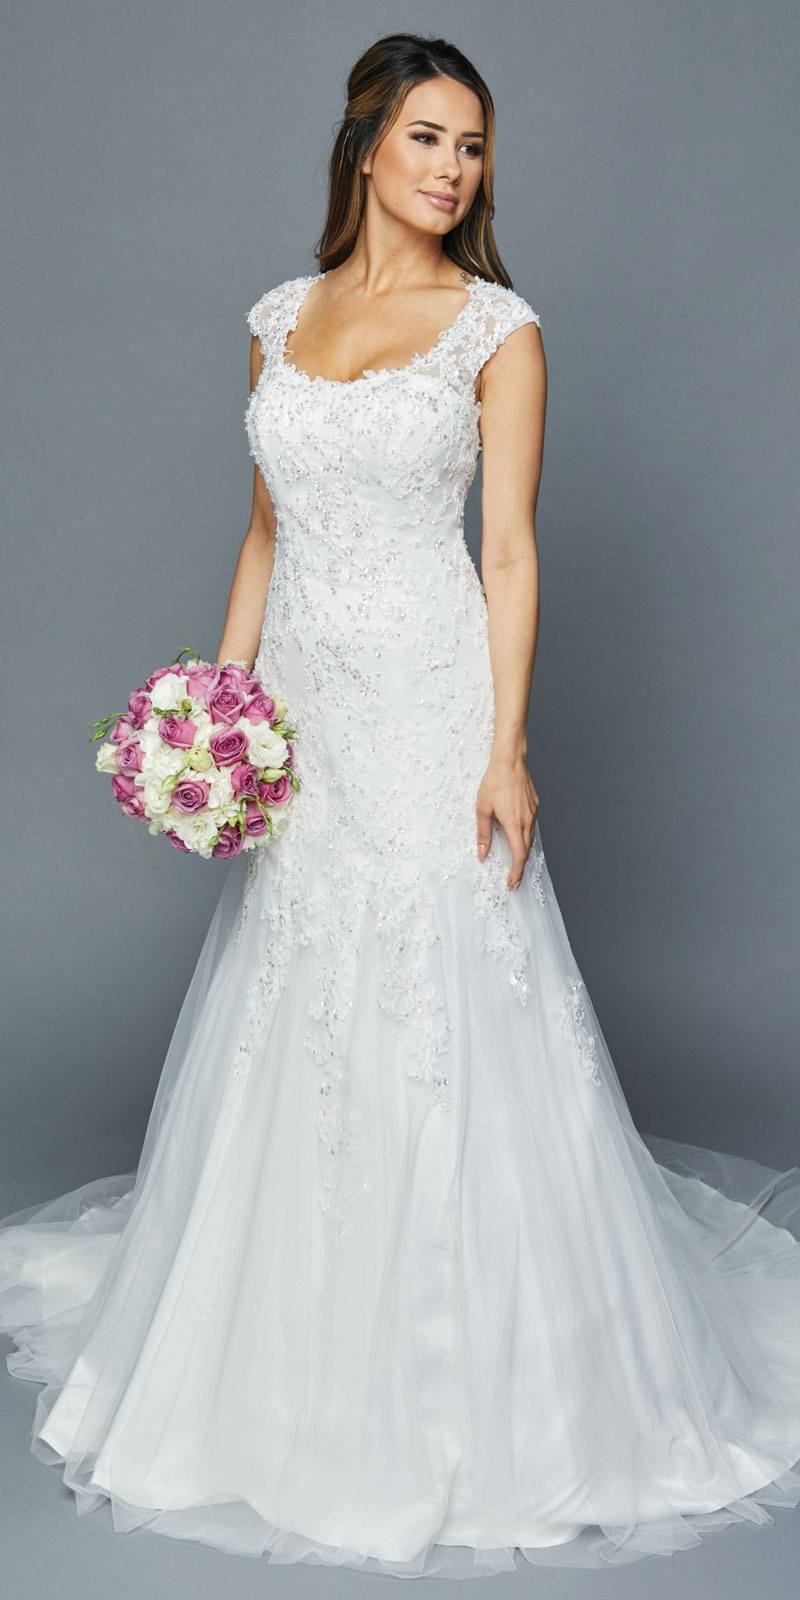 White Scoop Neck Appliqued Wedding Gown Cut-Out Back